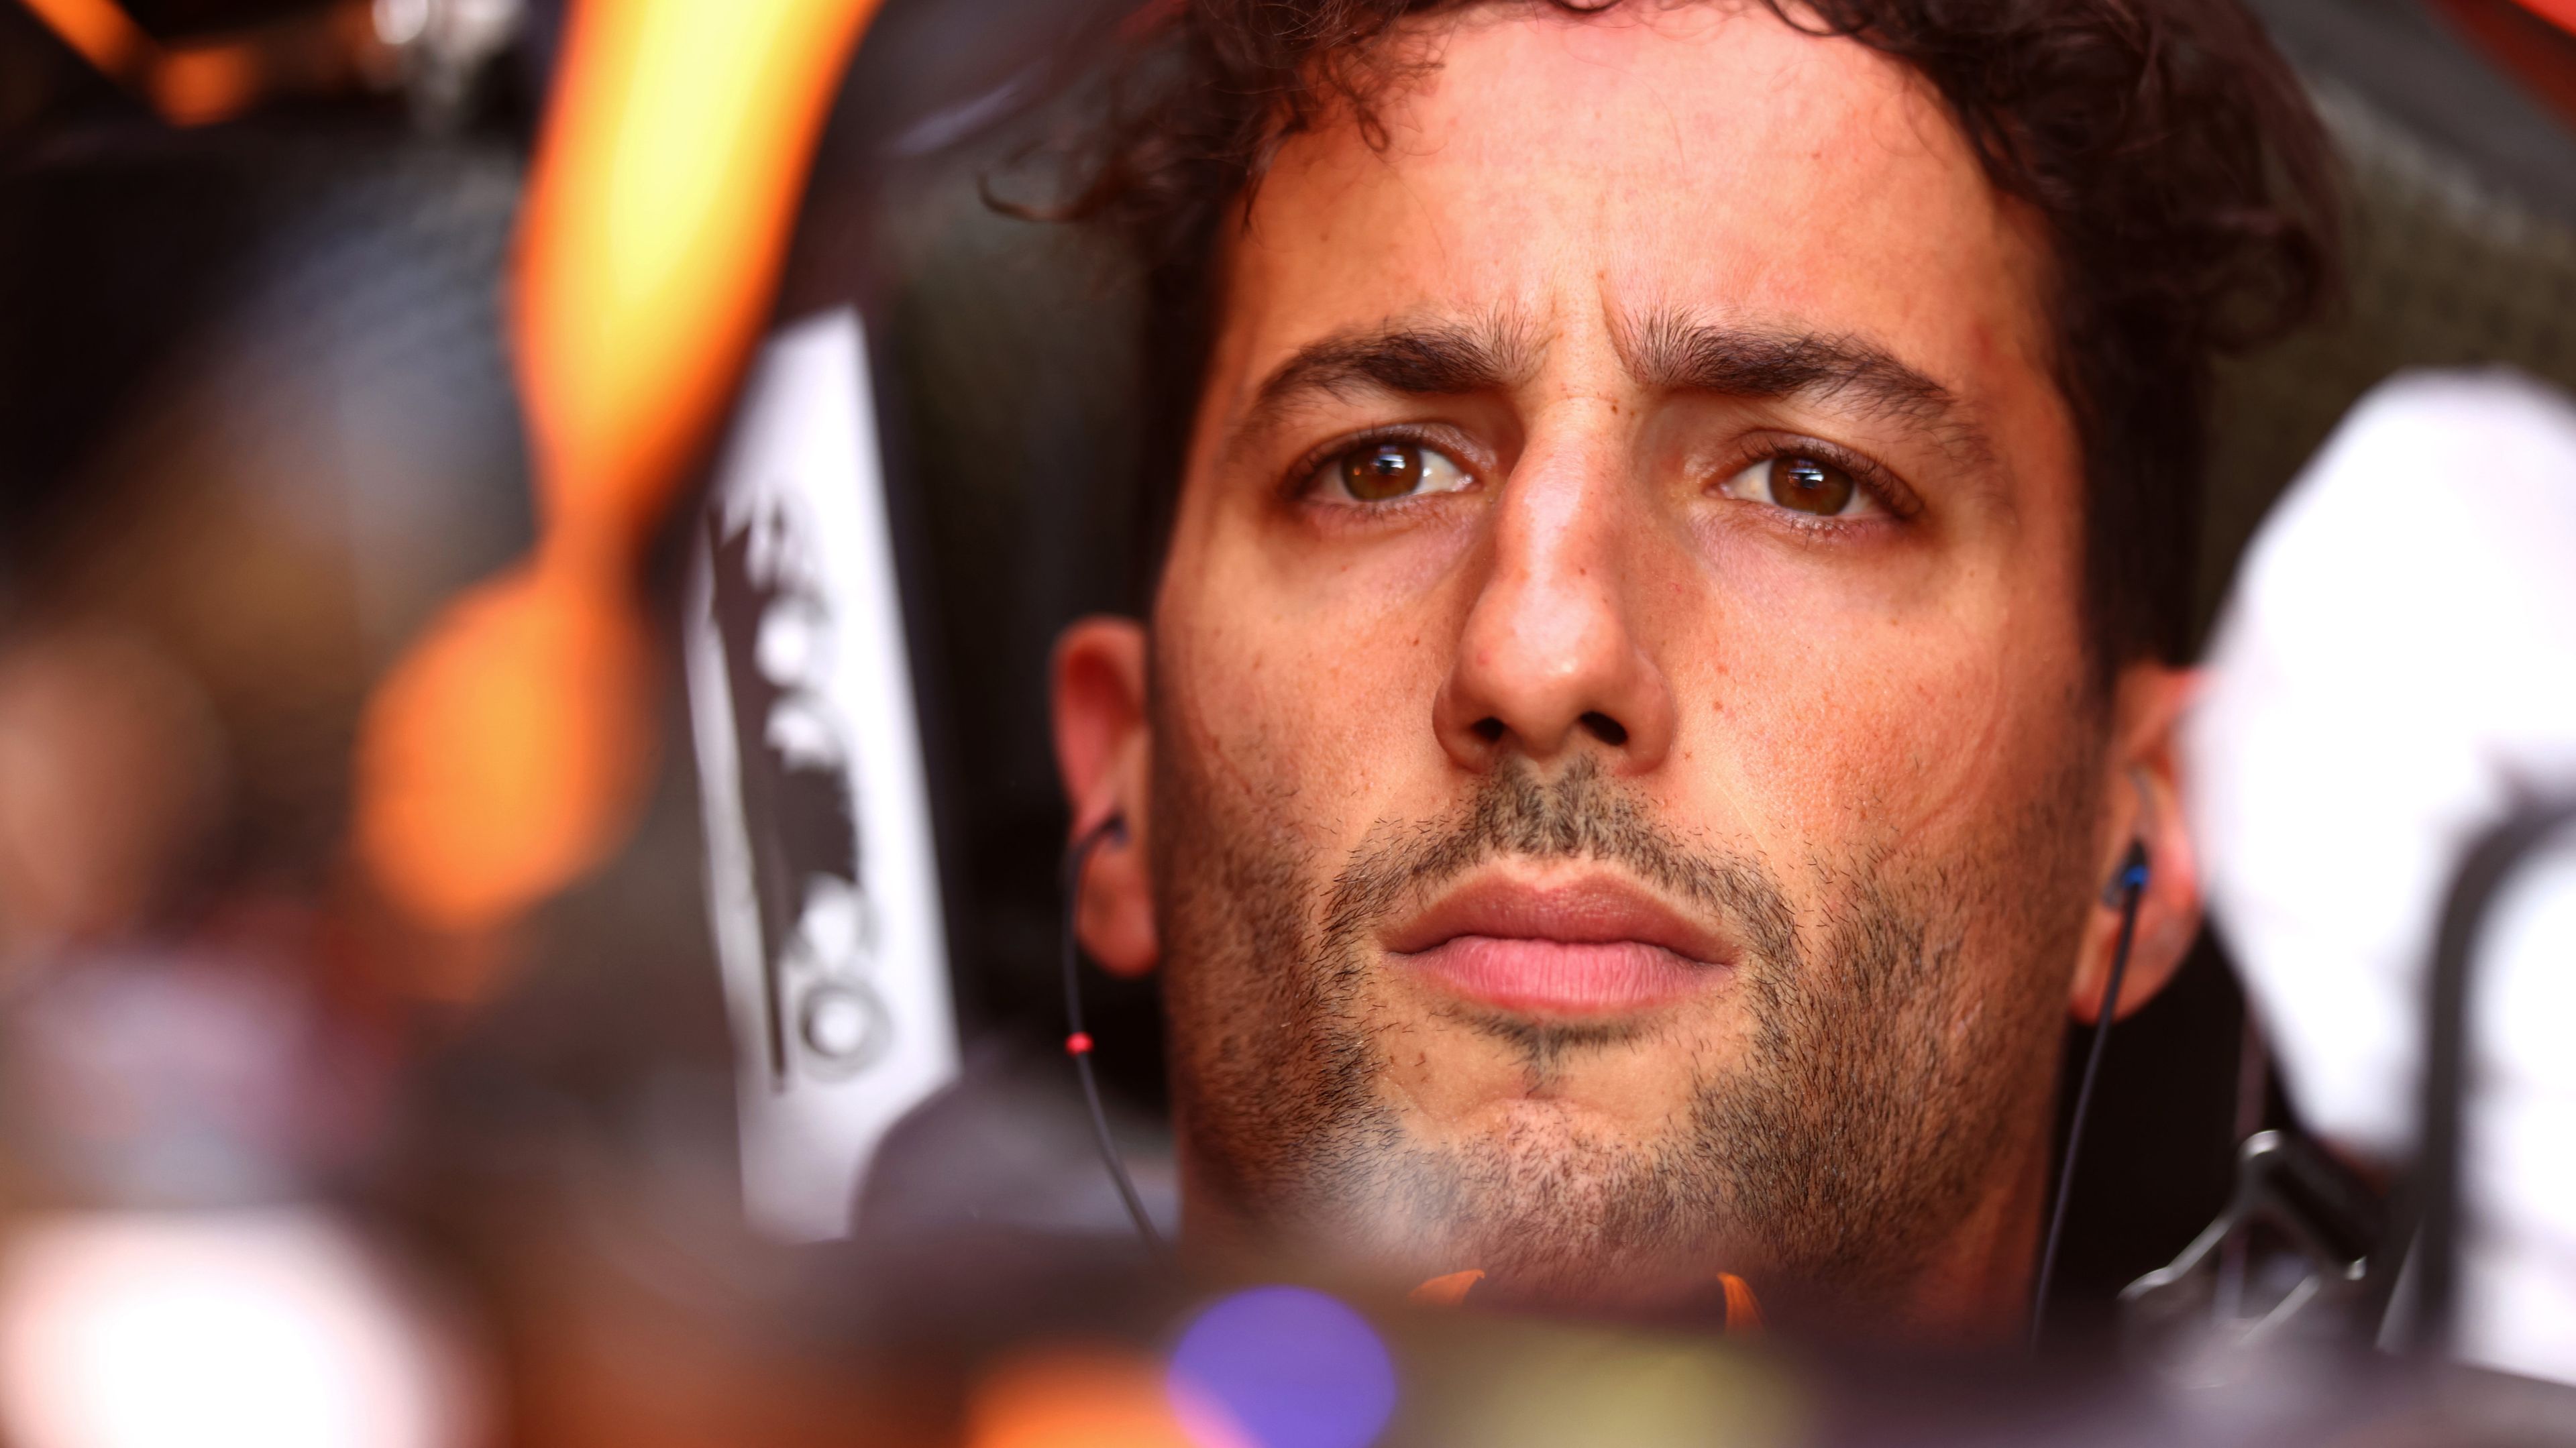 Daniel Ricciardo of Australia in the (3) McLaren MCL36 Mercedes during practice ahead of the F1 Grand Prix of The Netherlands at Circuit Zandvoort on September 02, 2022 in Zandvoort, Netherlands. (Photo by Alex Pantling - Formula 1/Formula 1 via Getty Images)